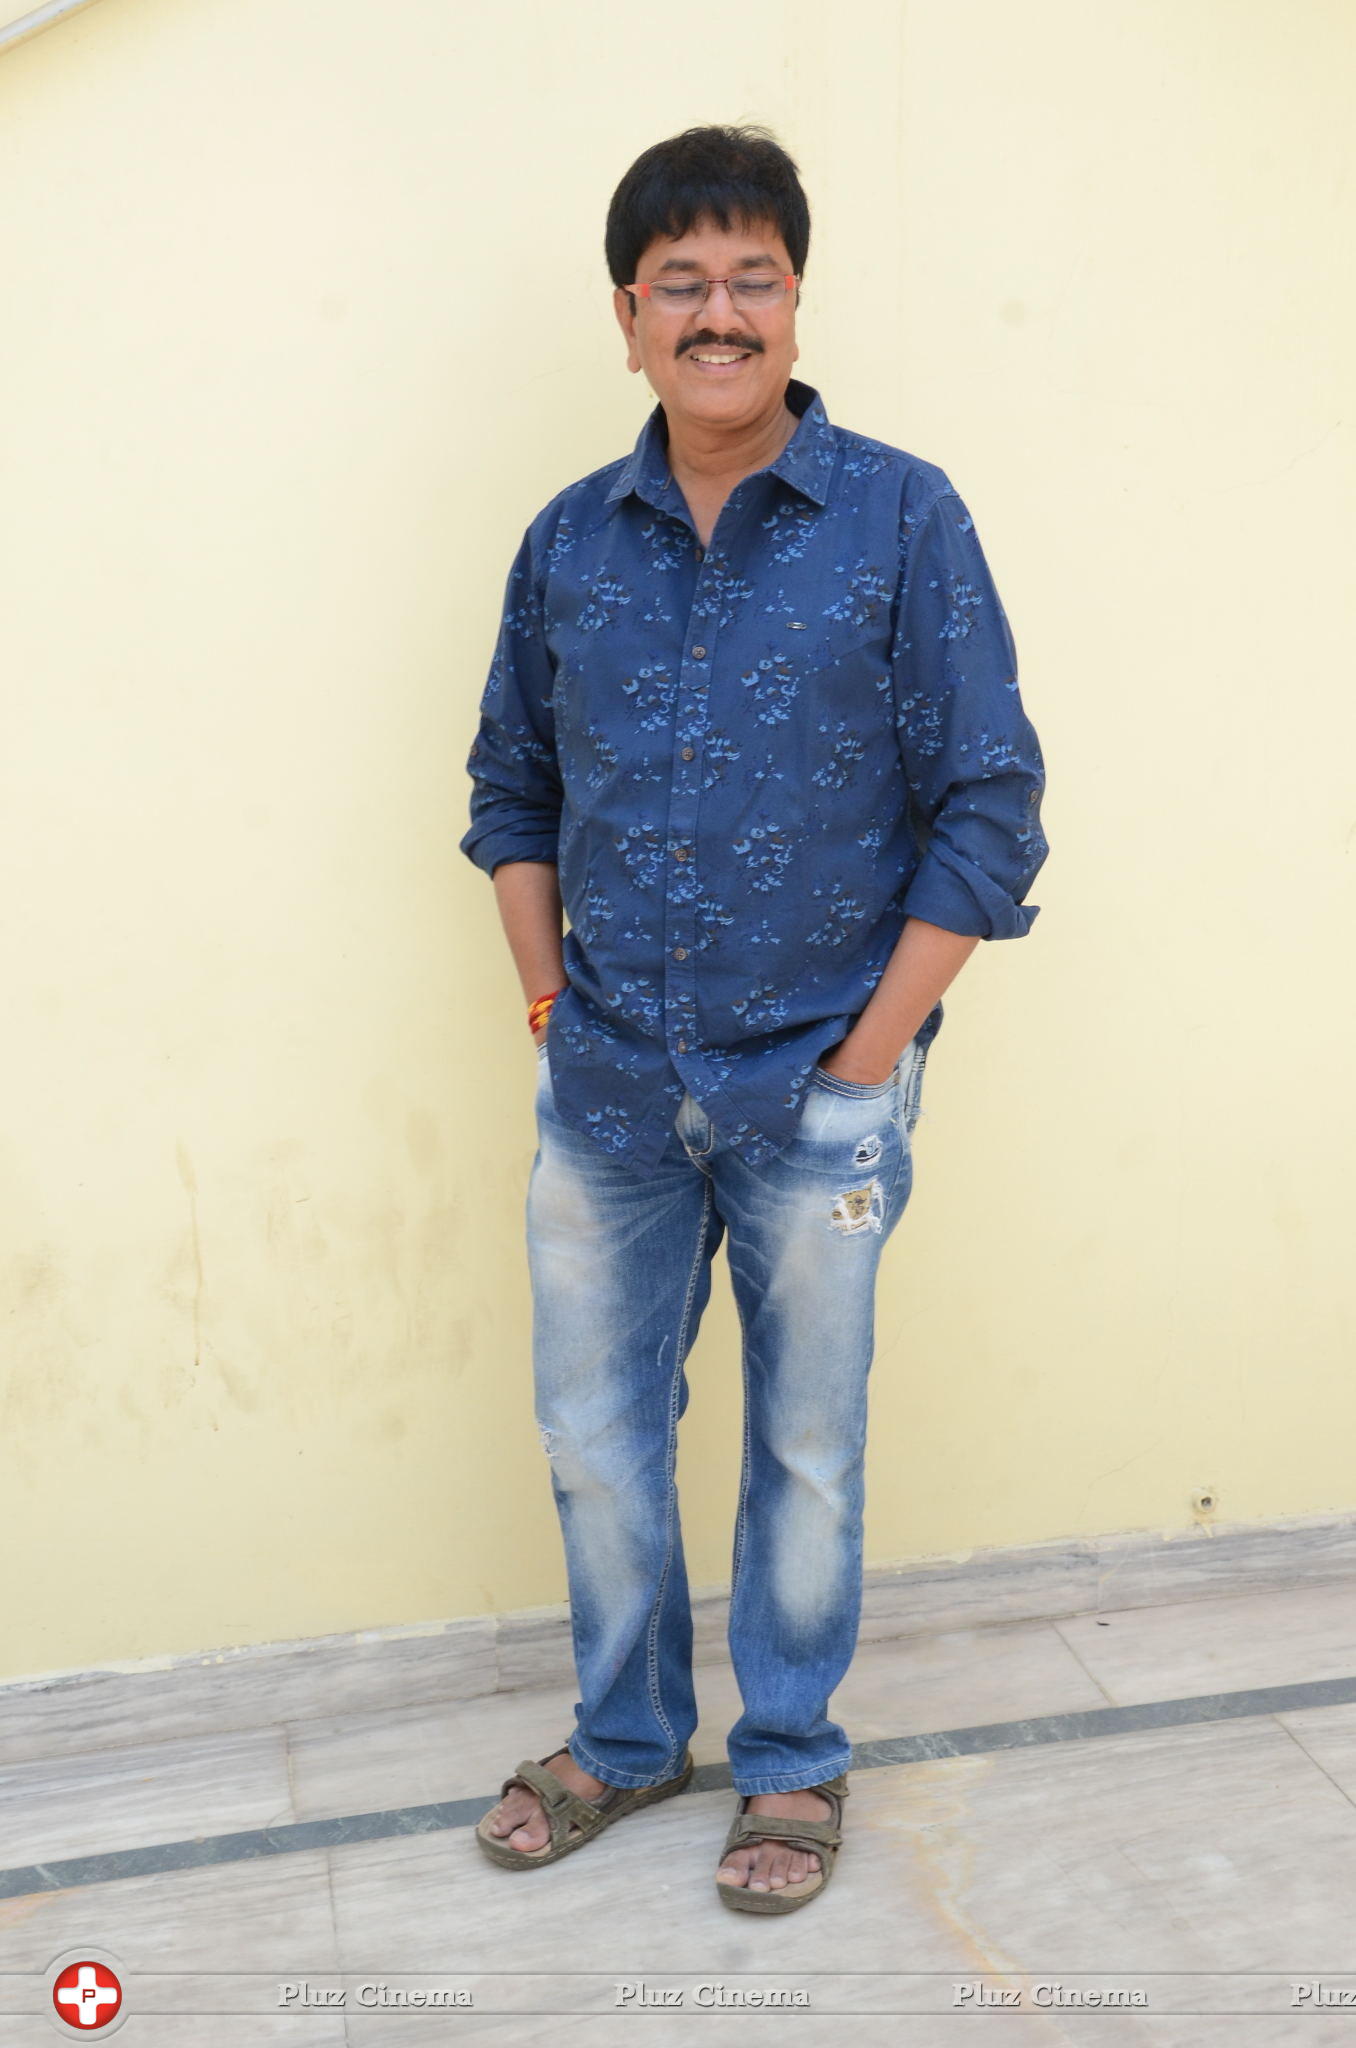 Director Nageswara Reddy Interview Photos | Picture 1286681